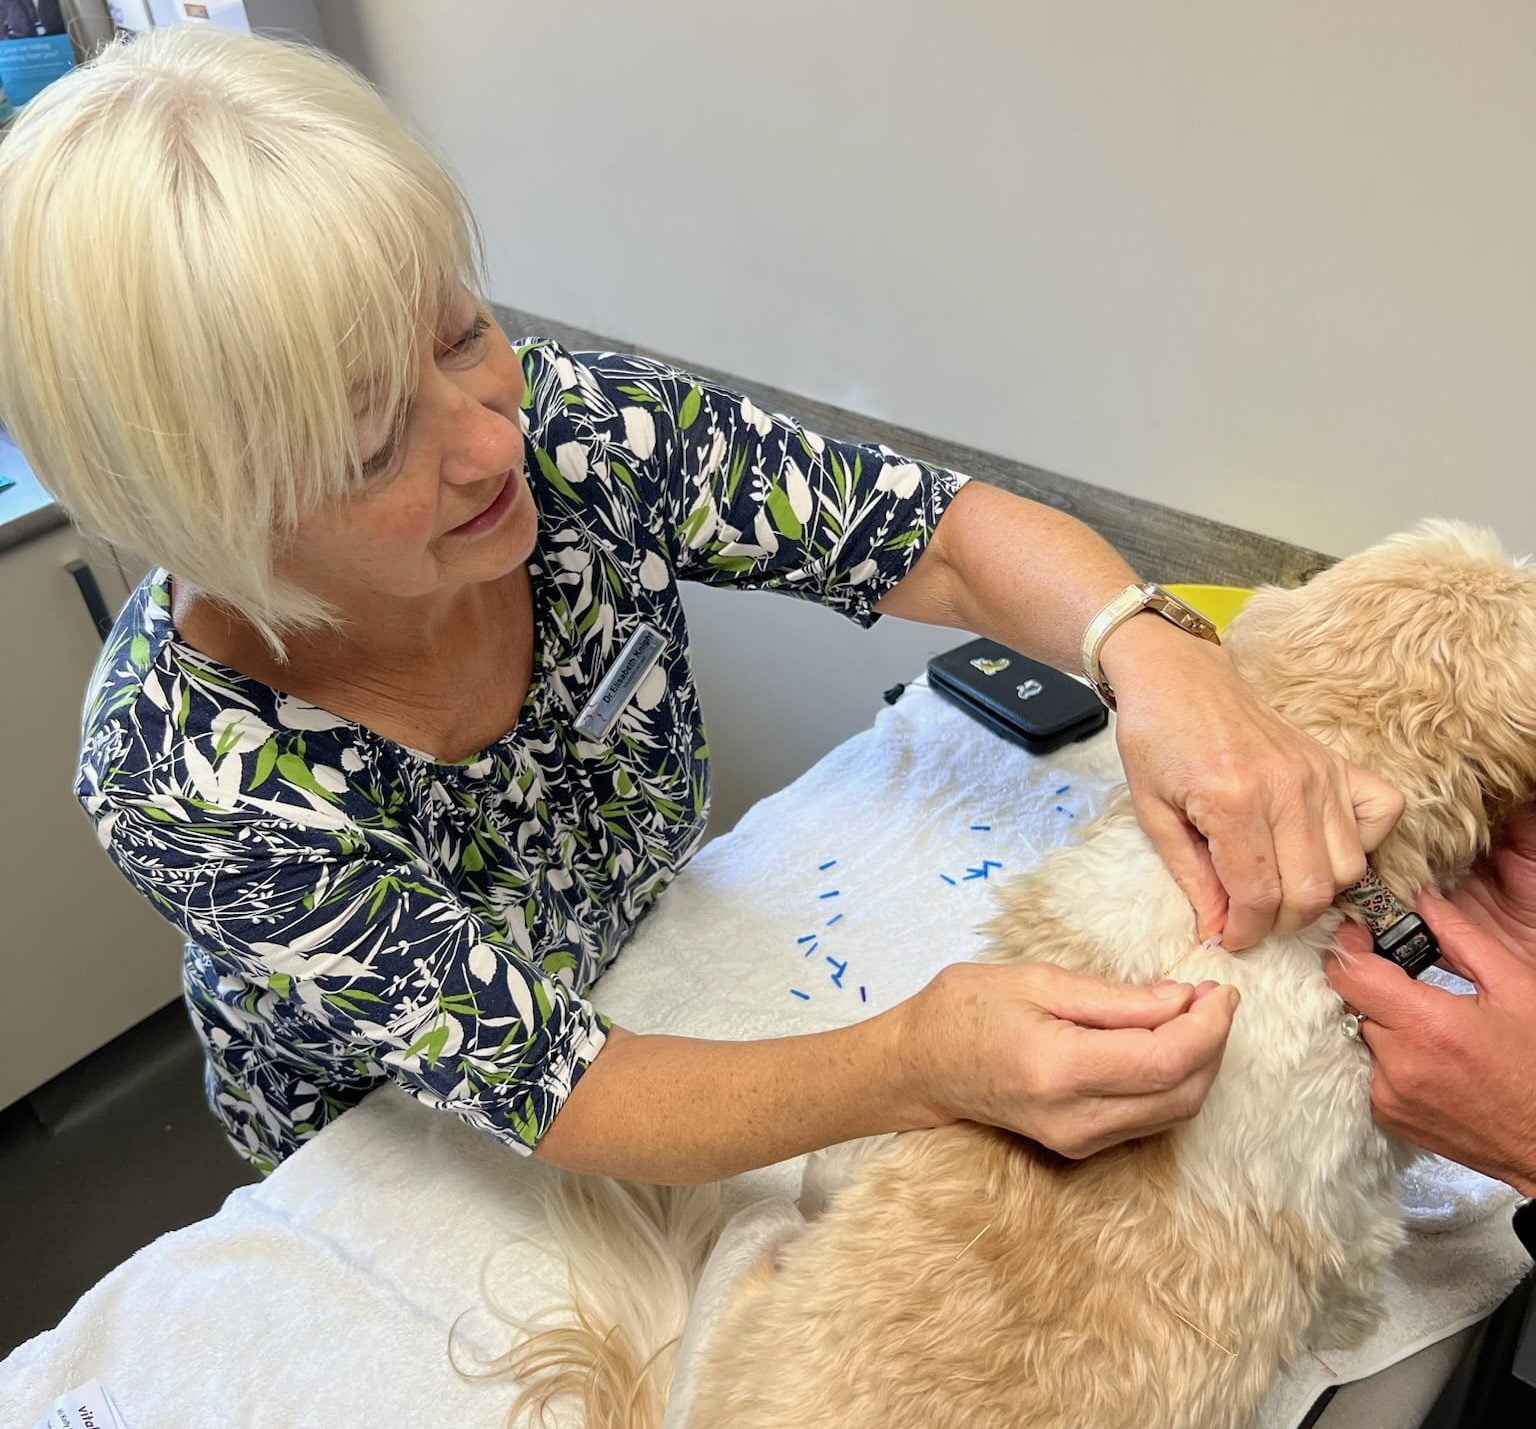 Inserting acupuncture needle to help tissue healing in a dog